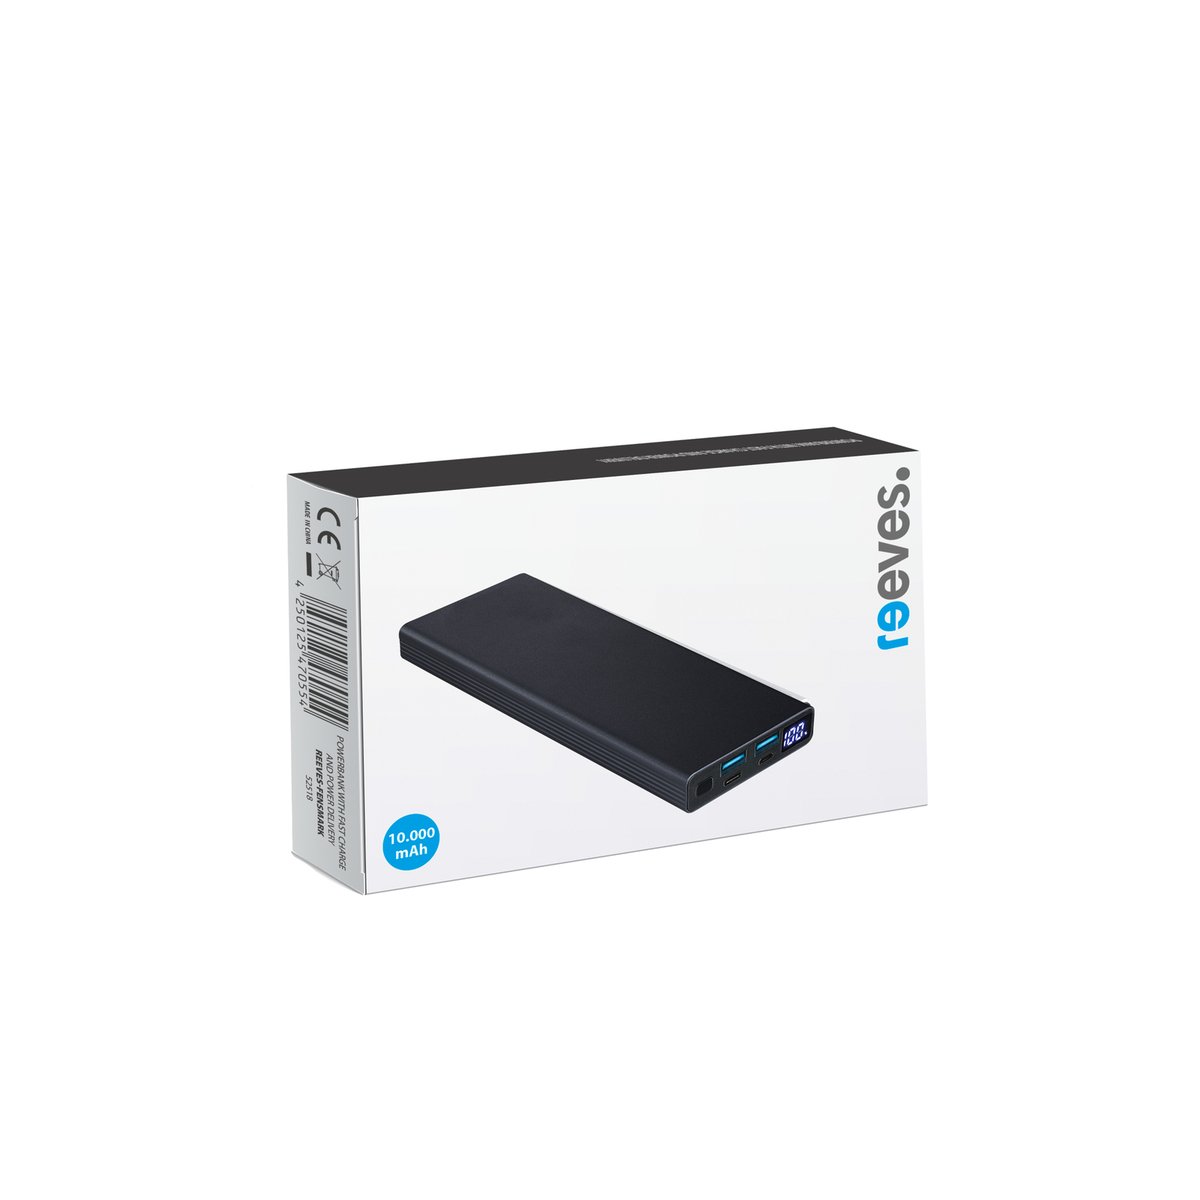 Powerbank with Fast Charge and Power Delivery REEVES-FENSMARK dark grey 10000 mAh